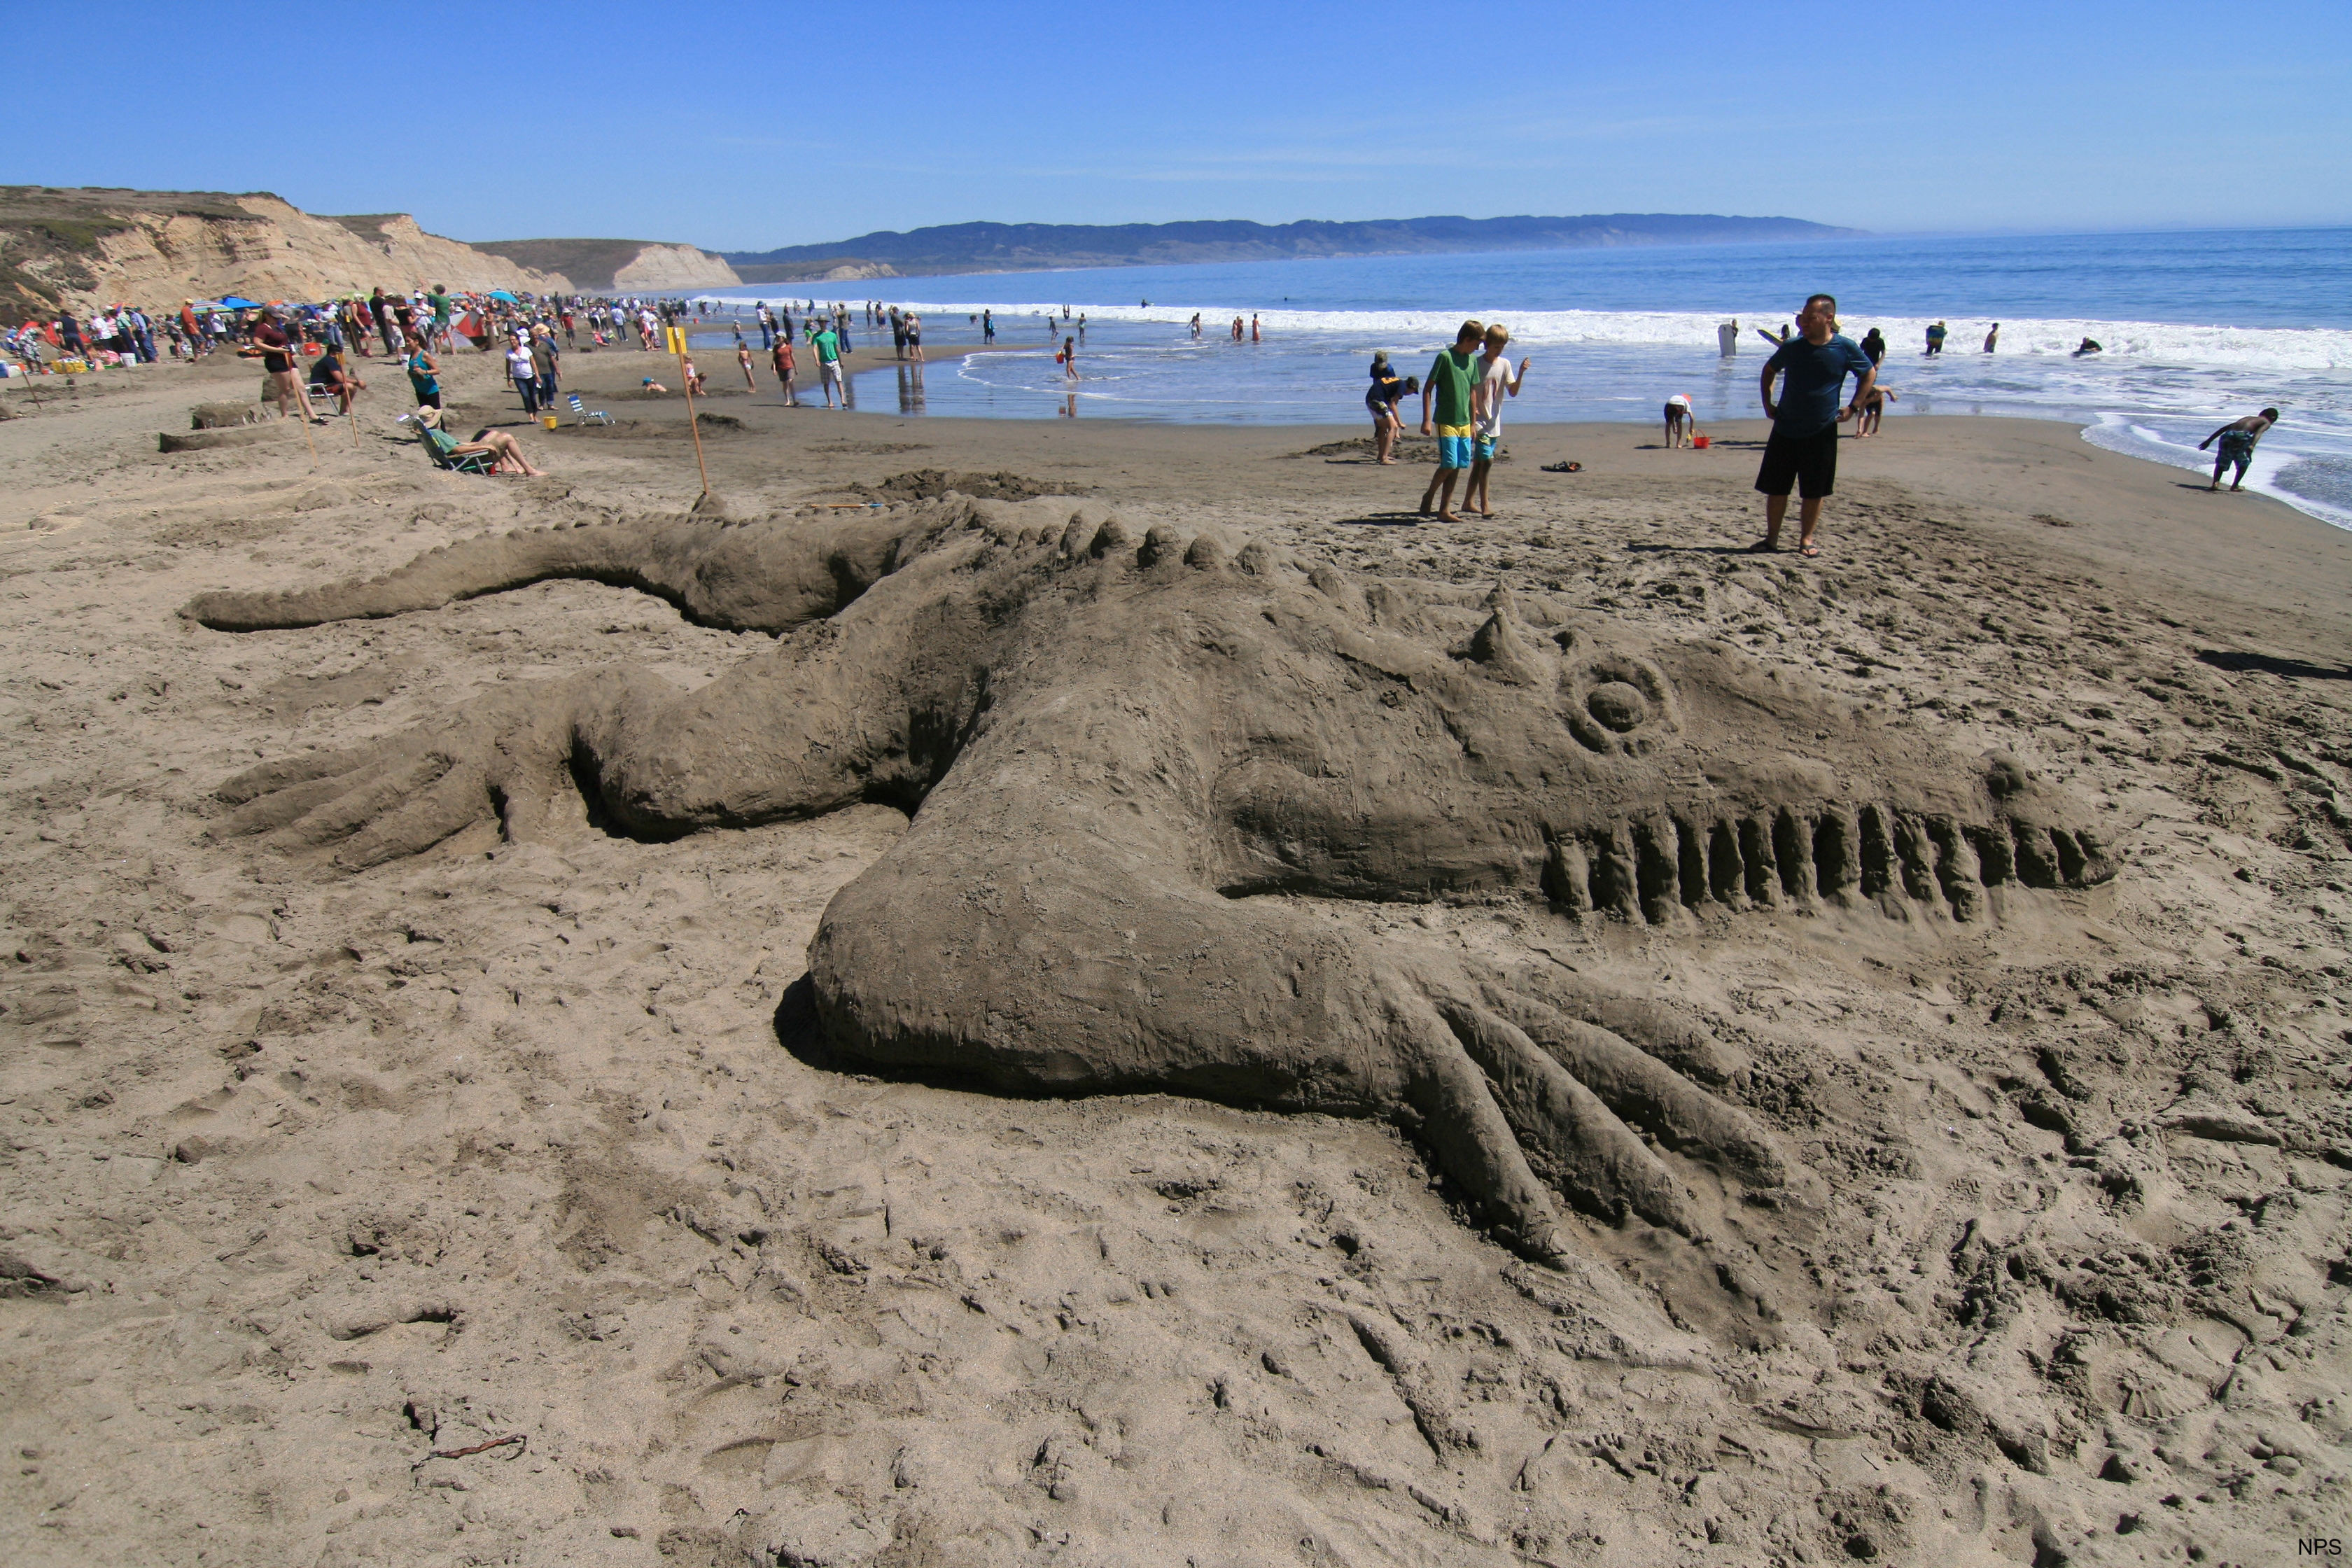 A sandcastle contest produced a dinosaur on a crowded beach at Point Reyes.